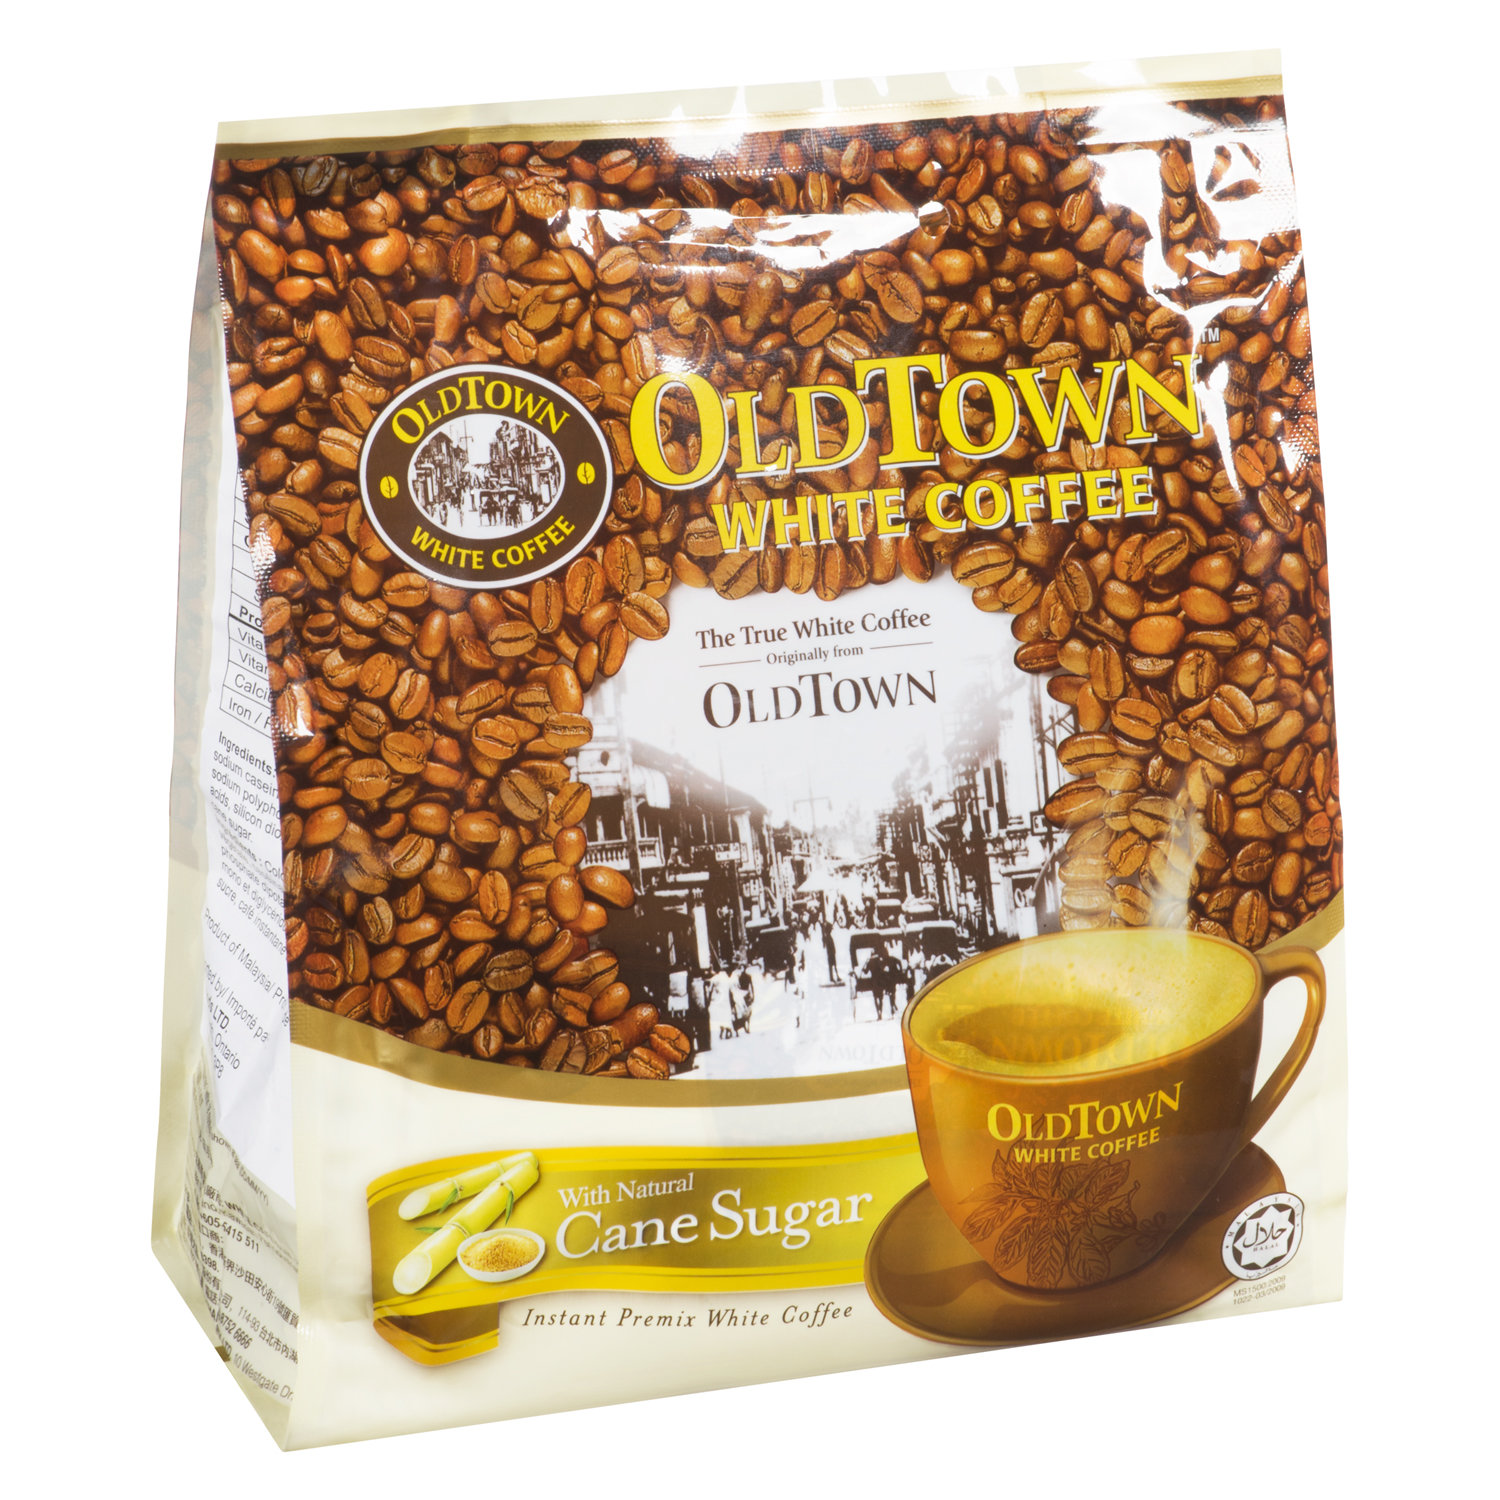 OLD TOWN - White Coffee With Cane Sugar - Save-On-Foods